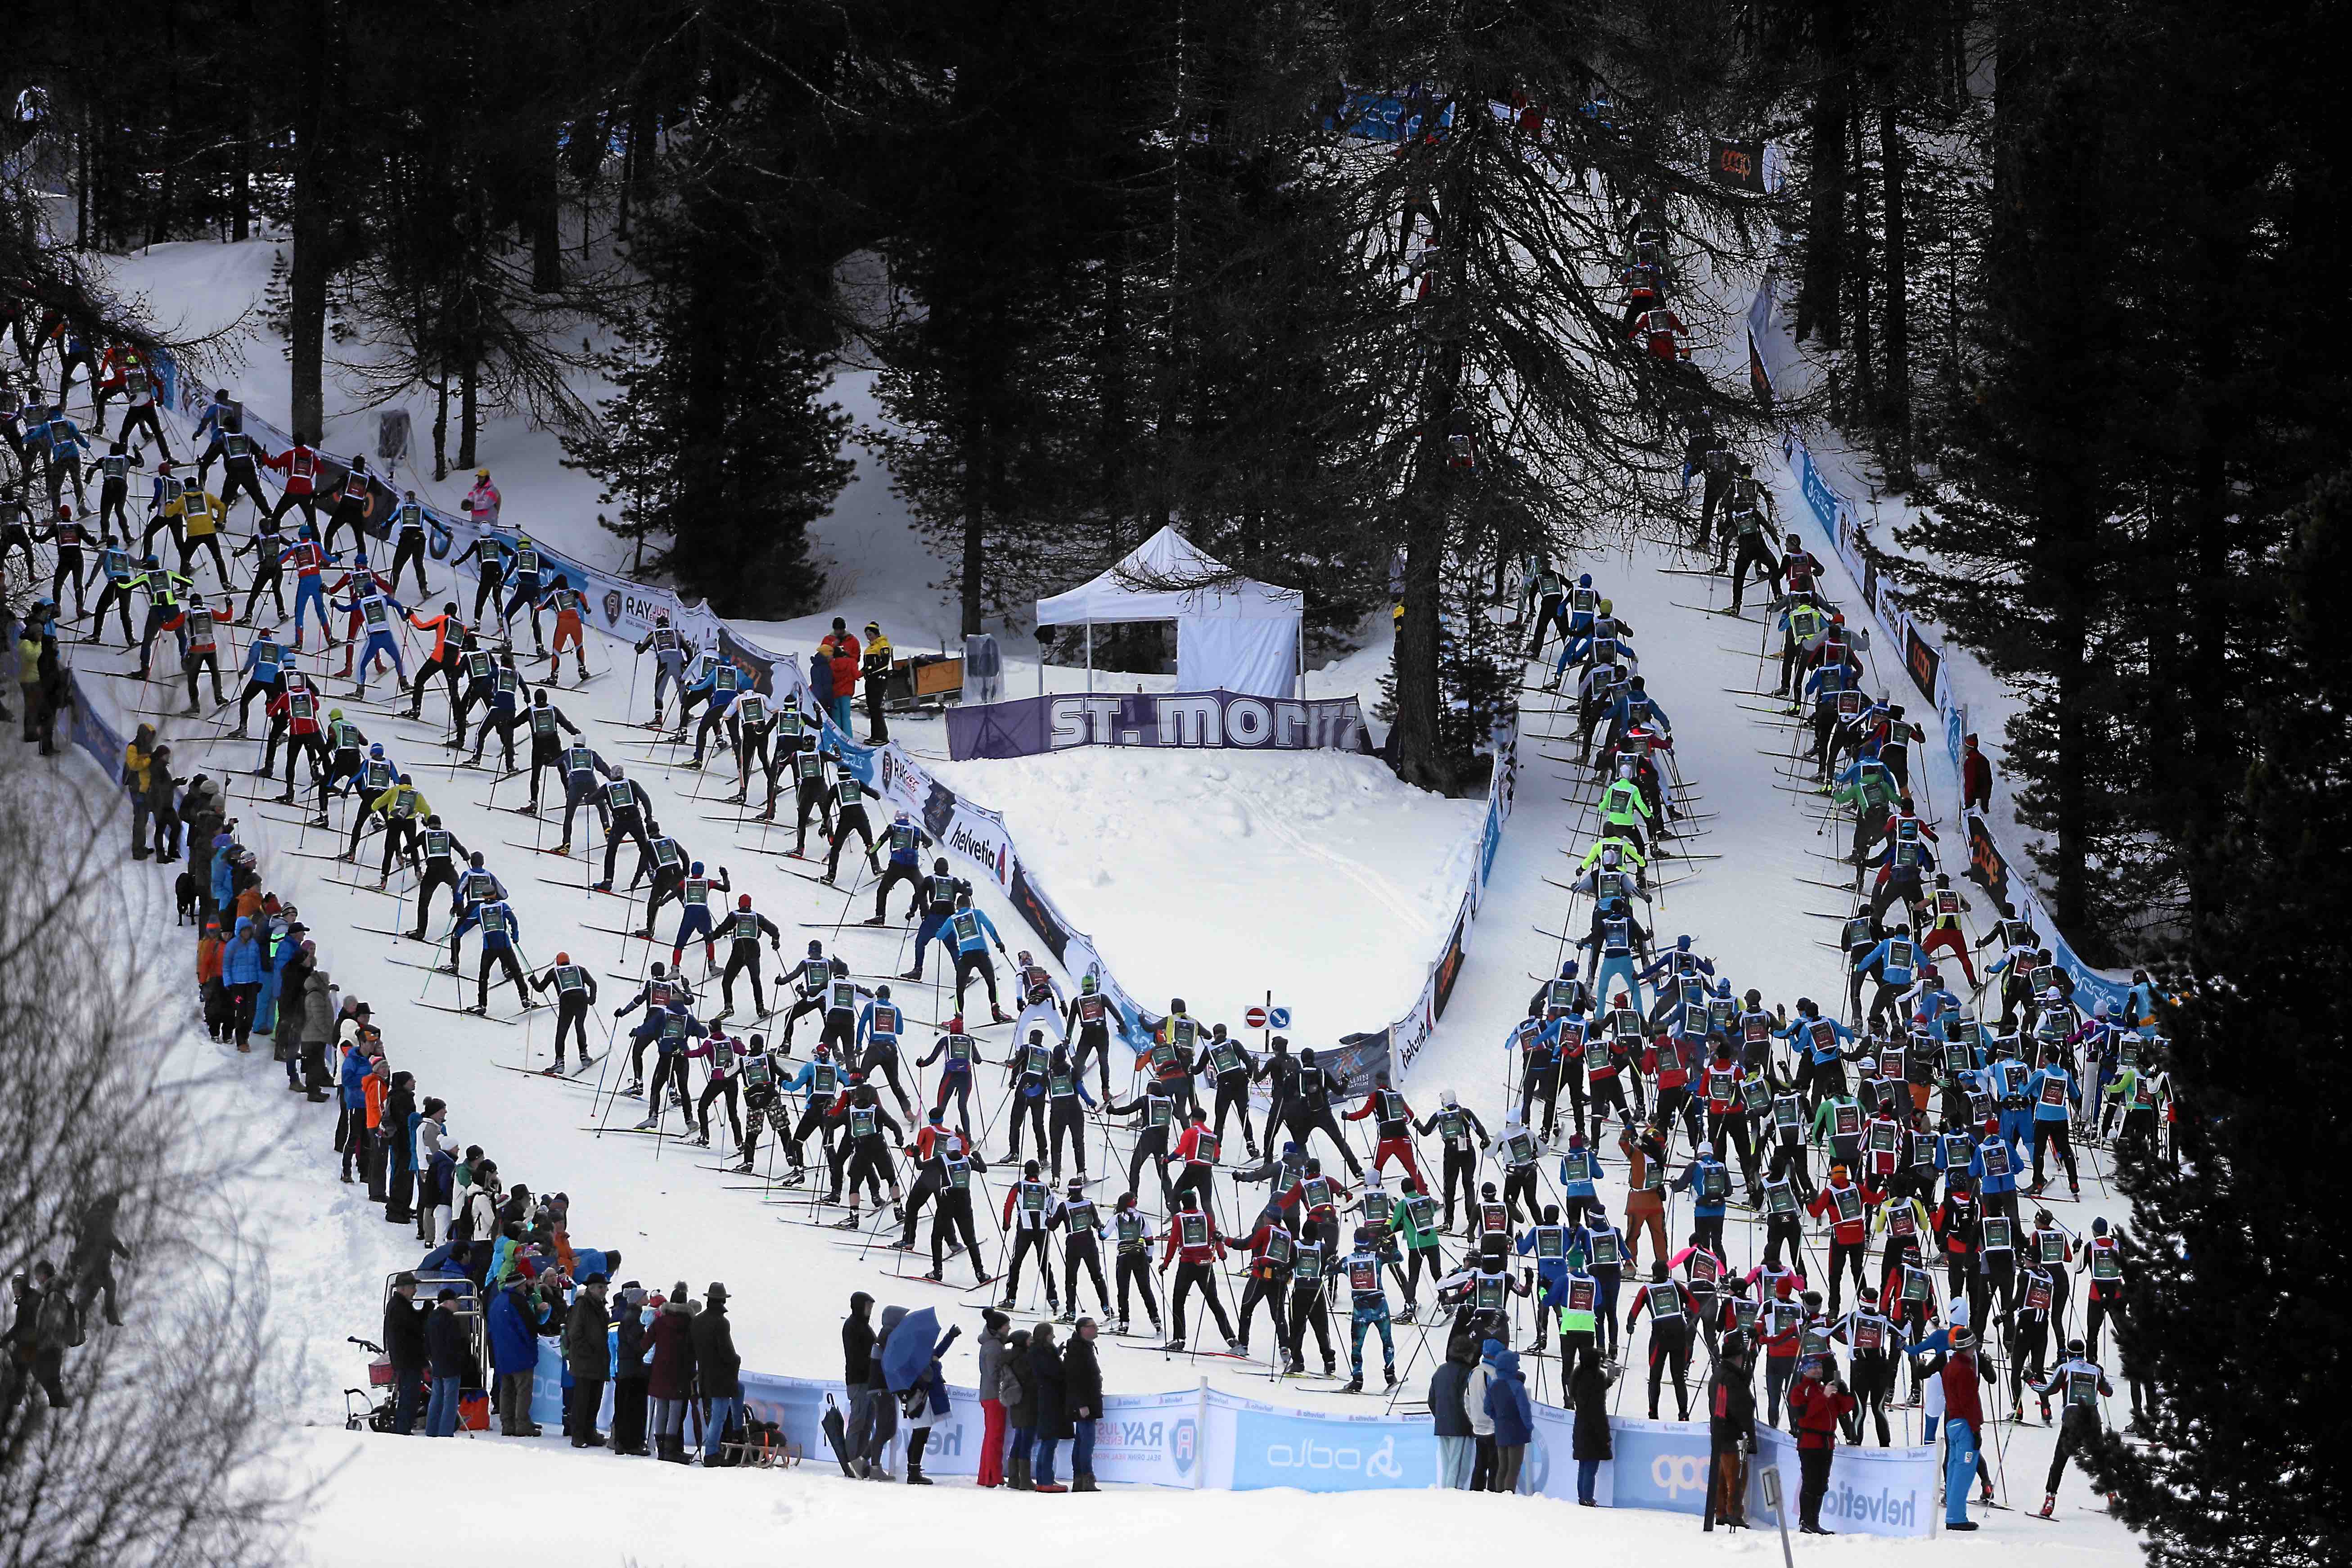 ﻿Cologna and von Siebenthal take home the victory at the 